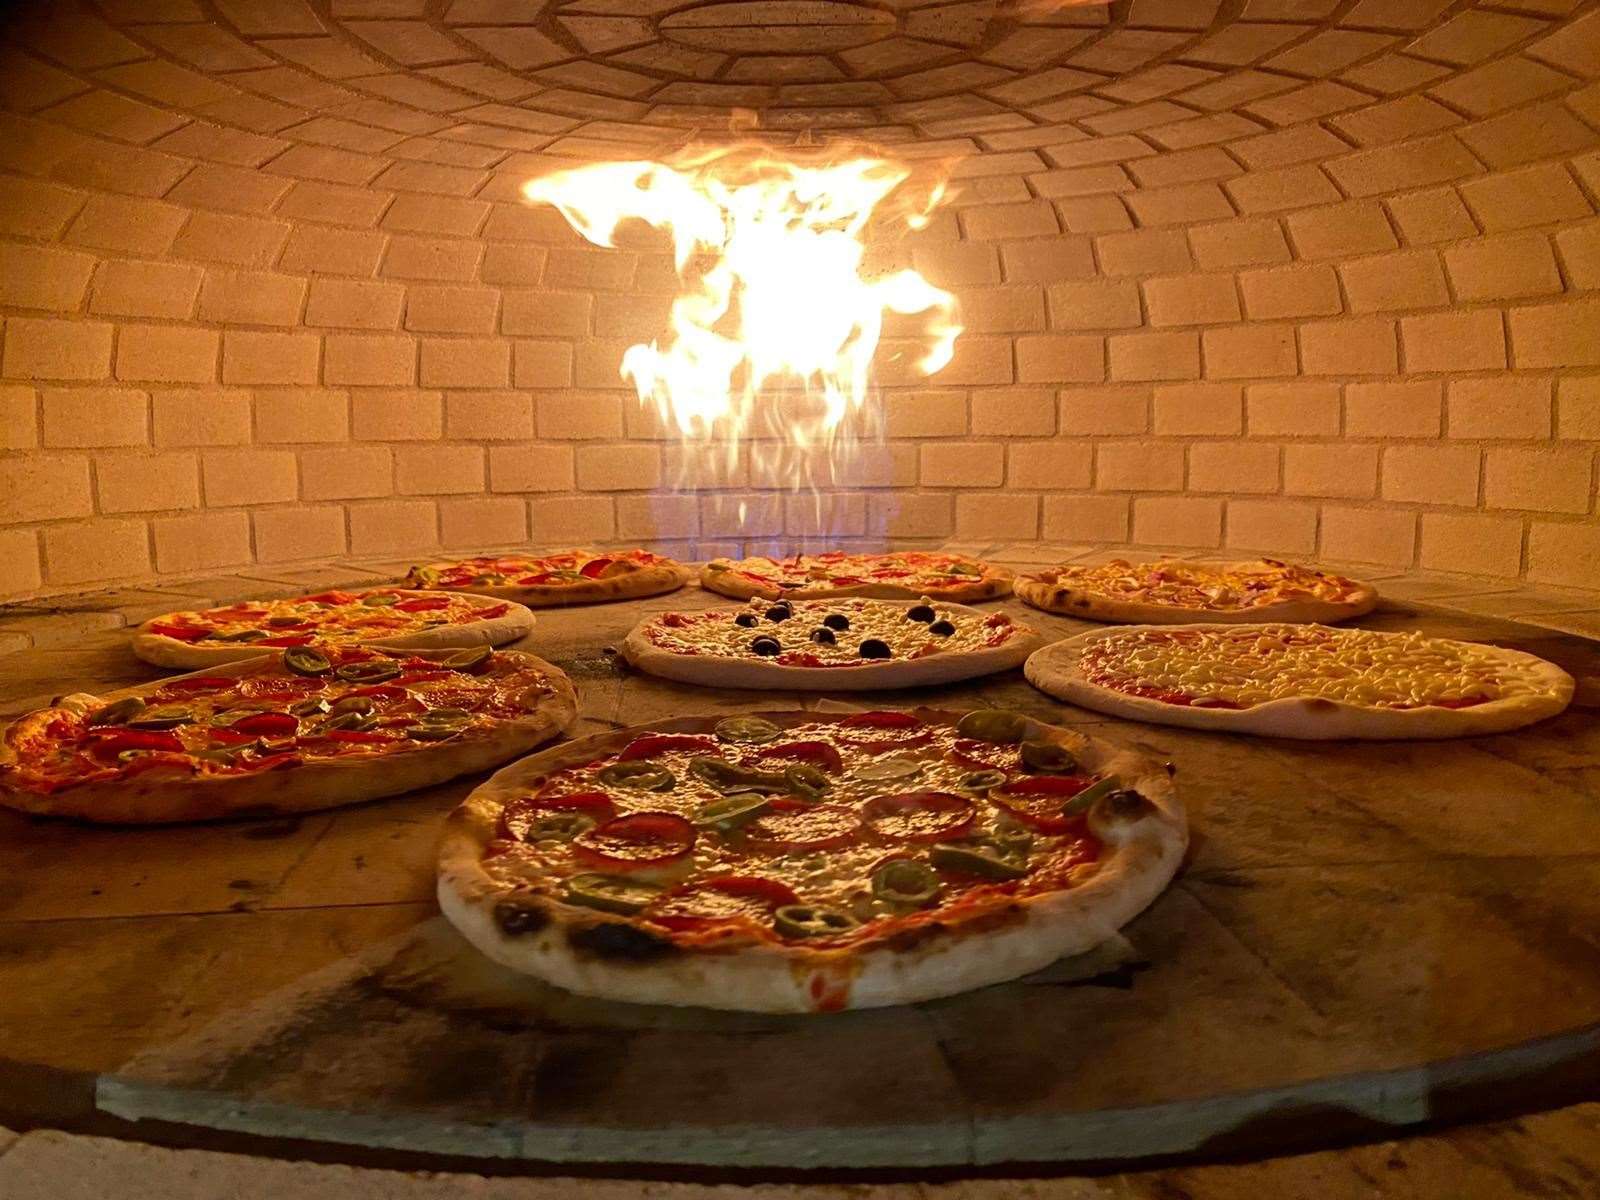 Fireaway Pizza, which can cook pizzas in 180 seconds, is set to open in Canterbury